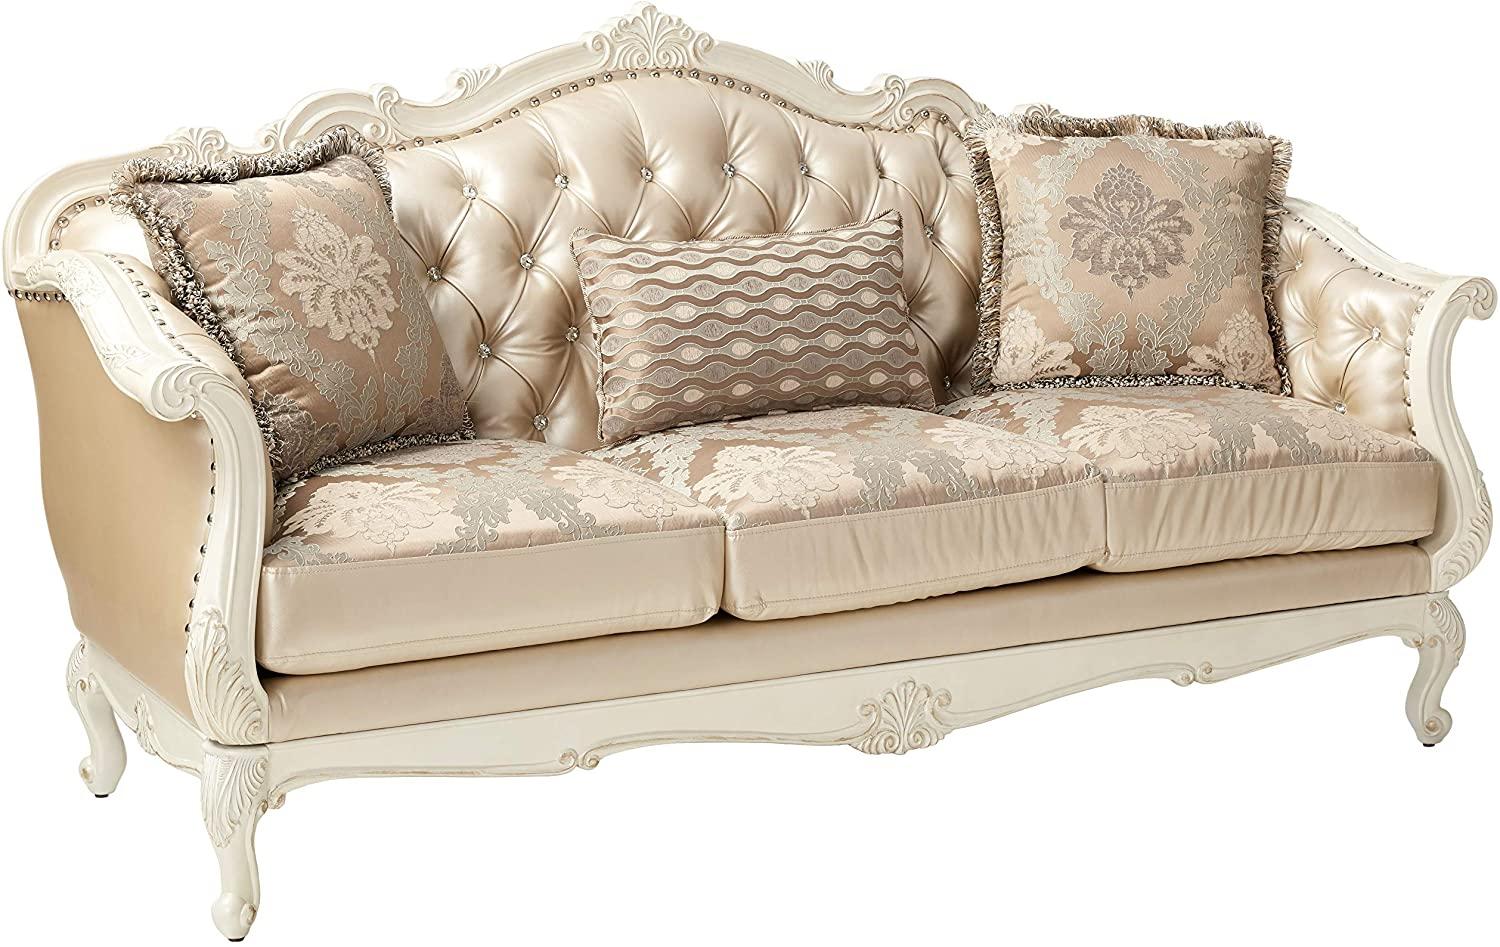 Classic, Traditional Sofa Chantelle 53540 53540 Chantelle in Pearl White, Platinum, Gold Fabric